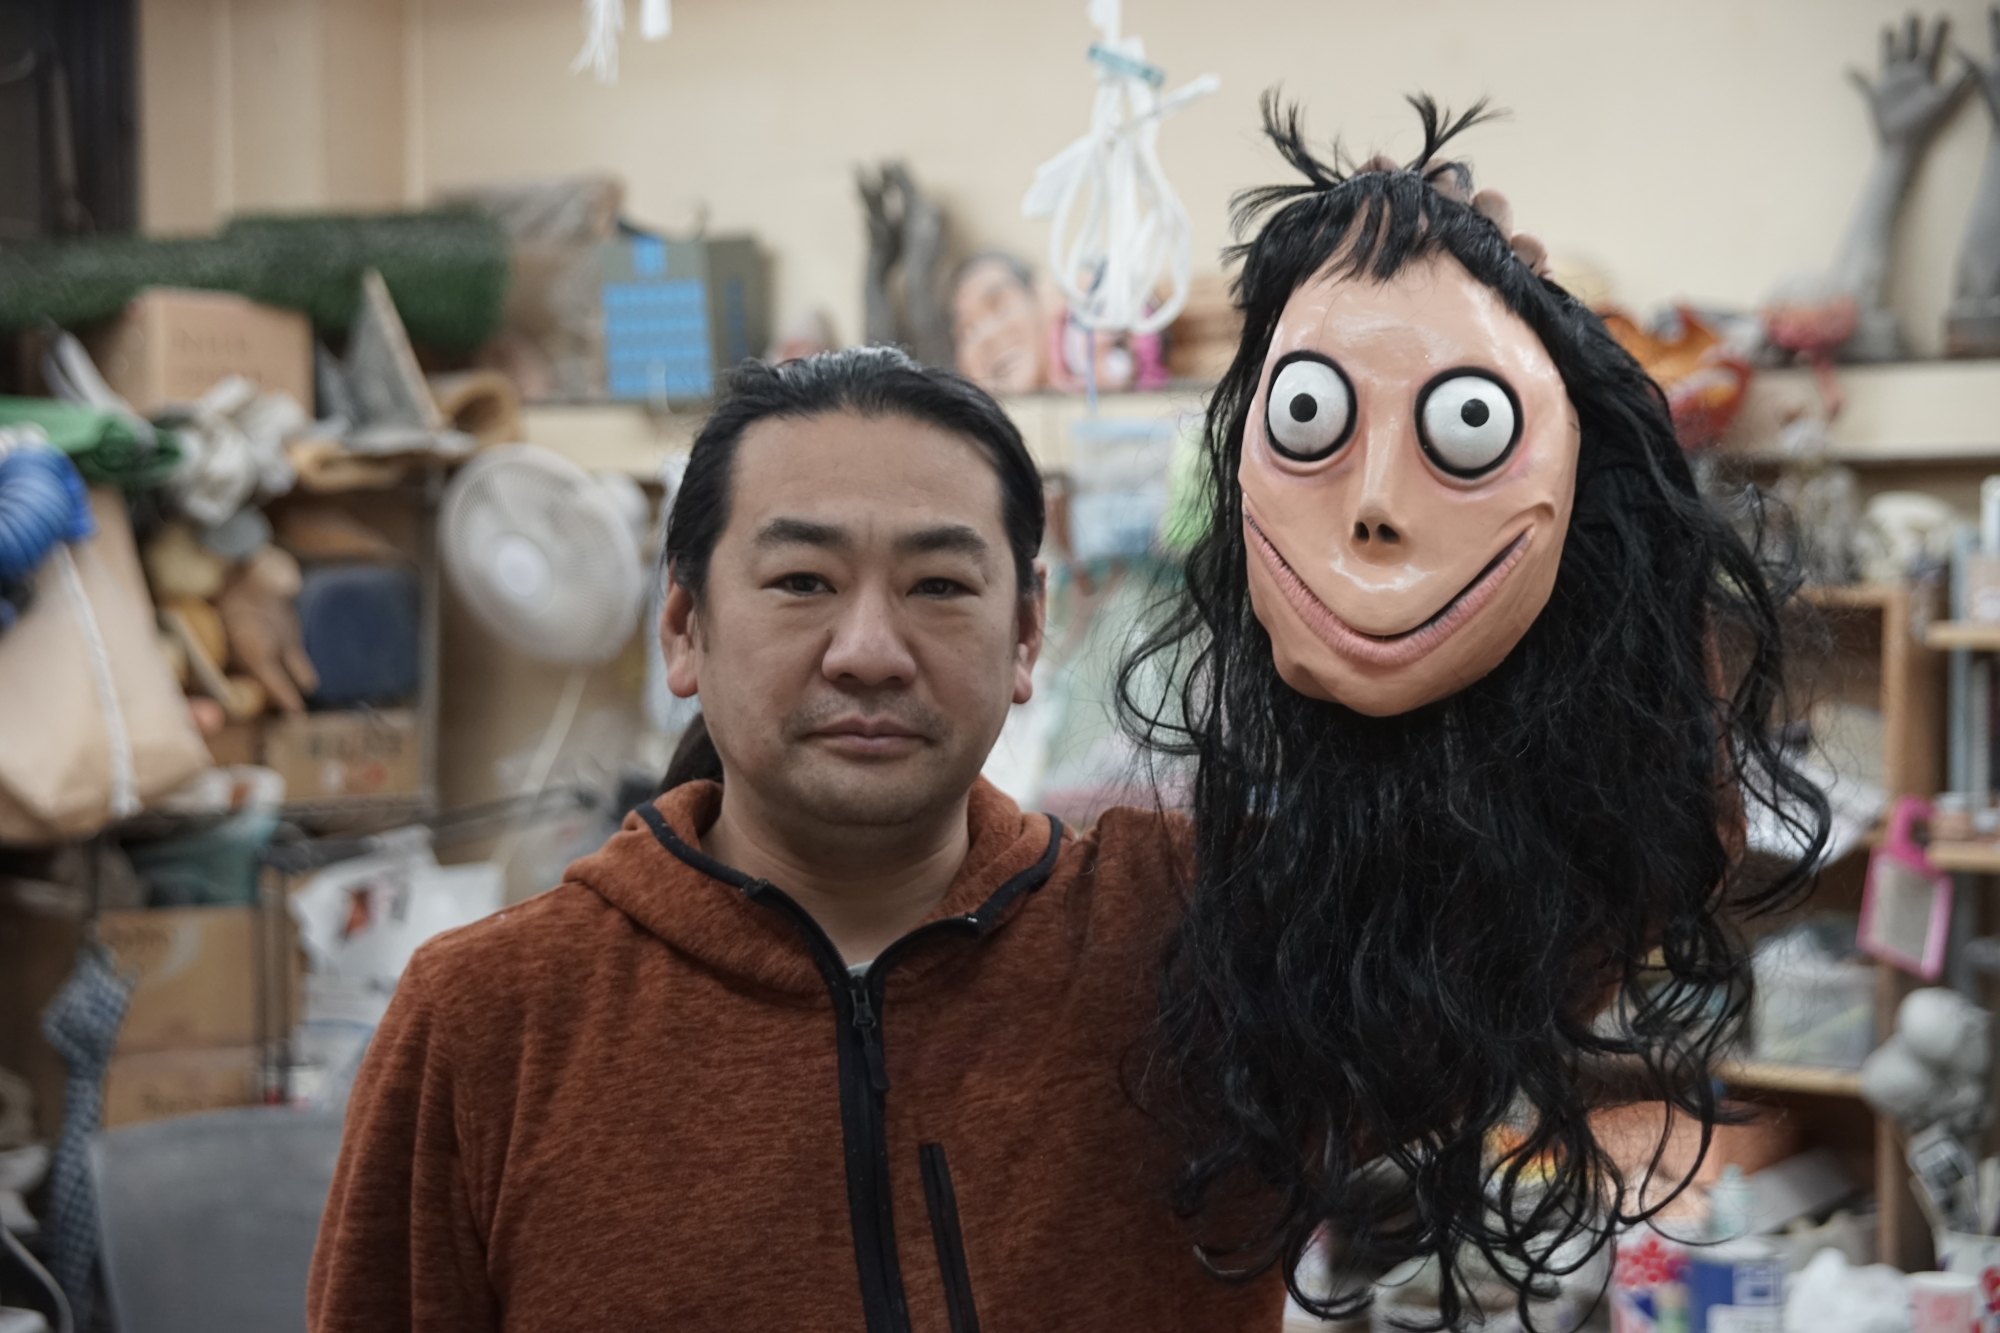 Artist Keisuke Aiso, creator of the goggle-eyed creature that was later dubbed Momo, holds up an unauthorized replica mask of the monster that a friend brought back as a souvenir from Mexico's Day of the Dead festivities, at his two-story studio on the outskirts of Tokyo on Monday. | RYUSEI TAKAHASHI